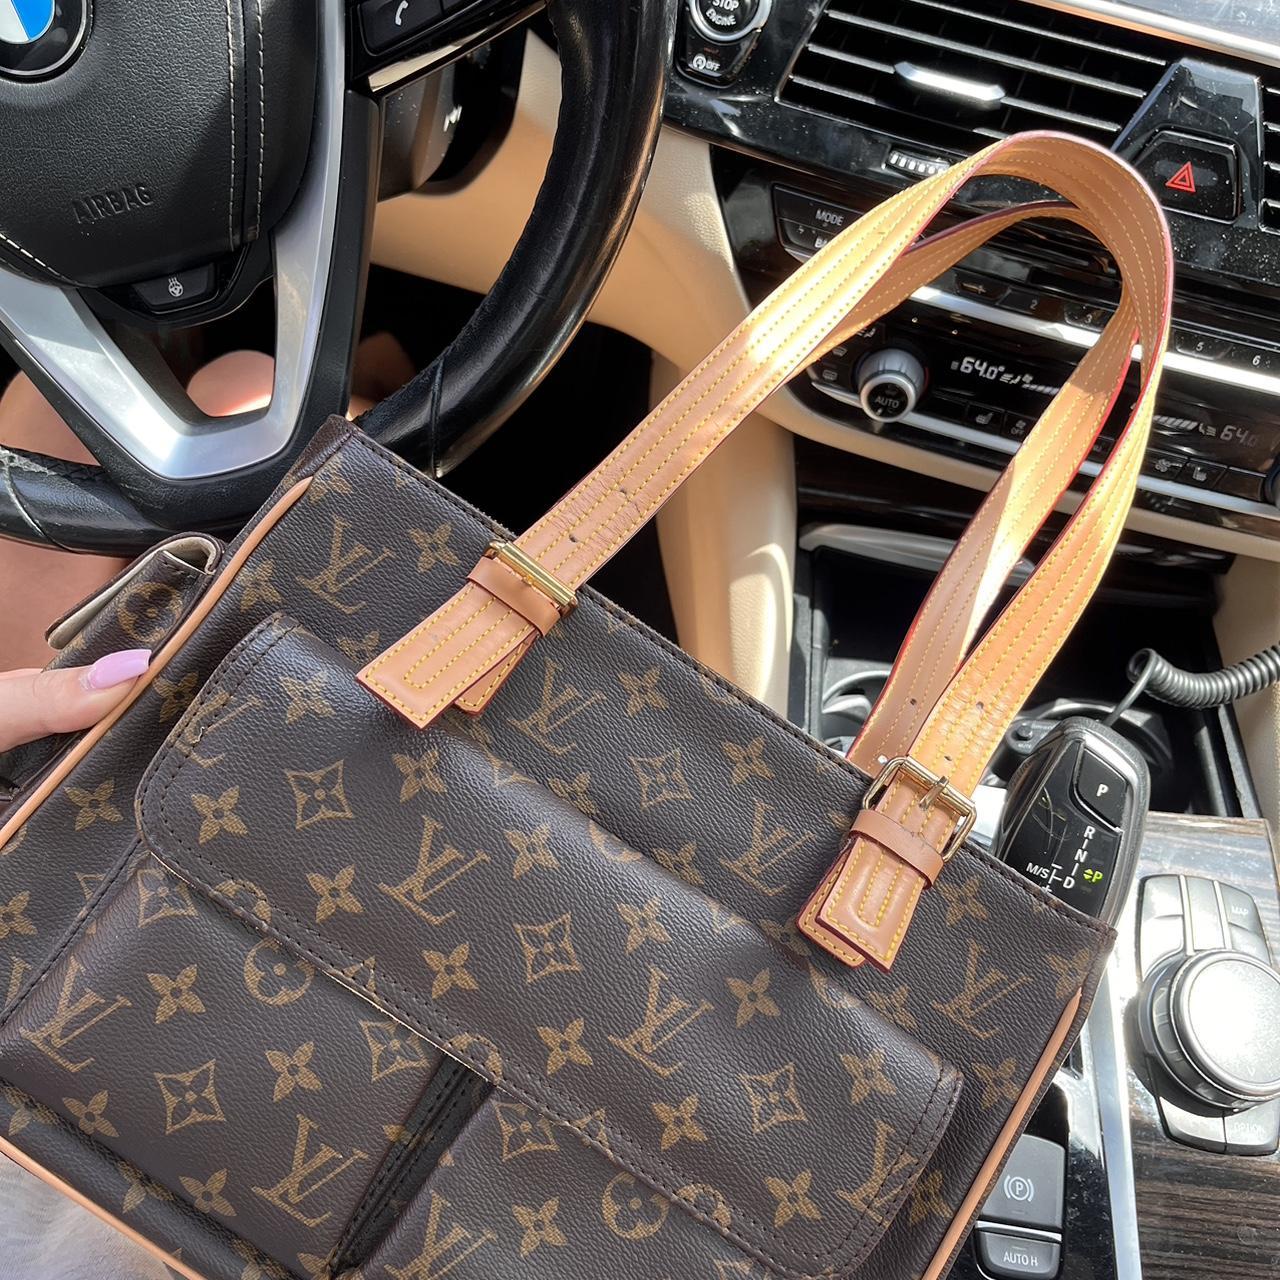 Louis Vuitton Hold Everything Bag